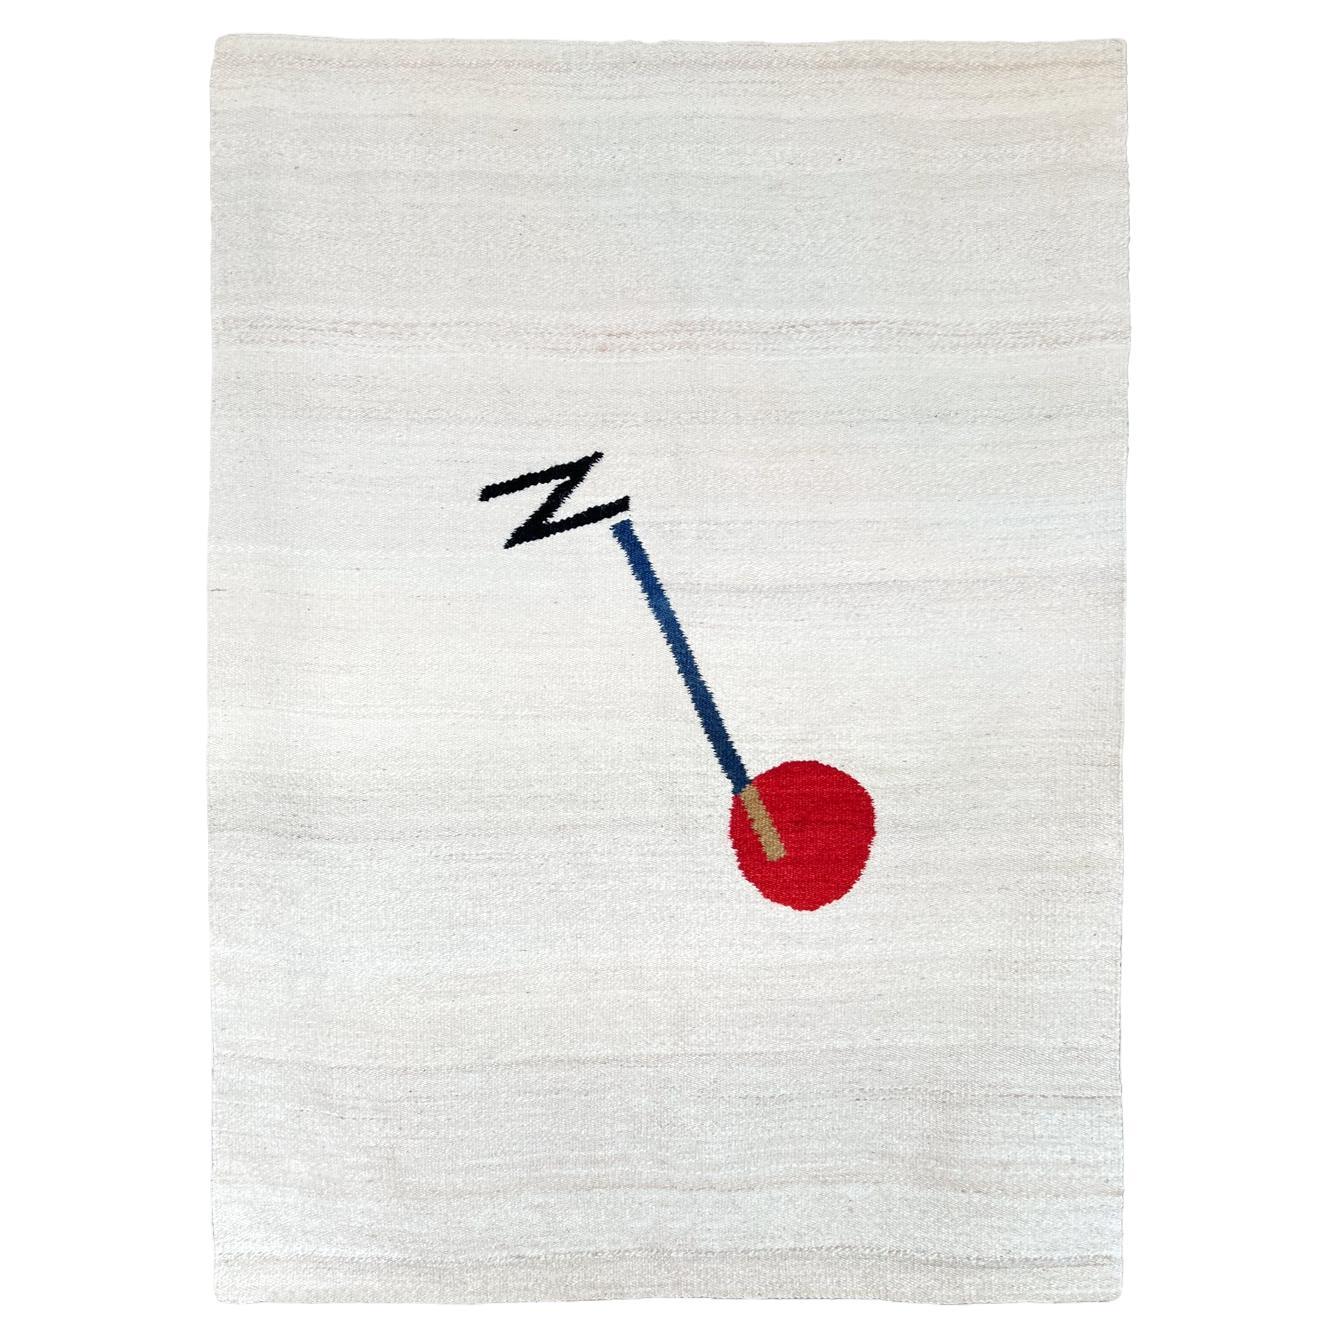 Hand-woven wool rug "N Line" by Marcela Sinclair For Sale